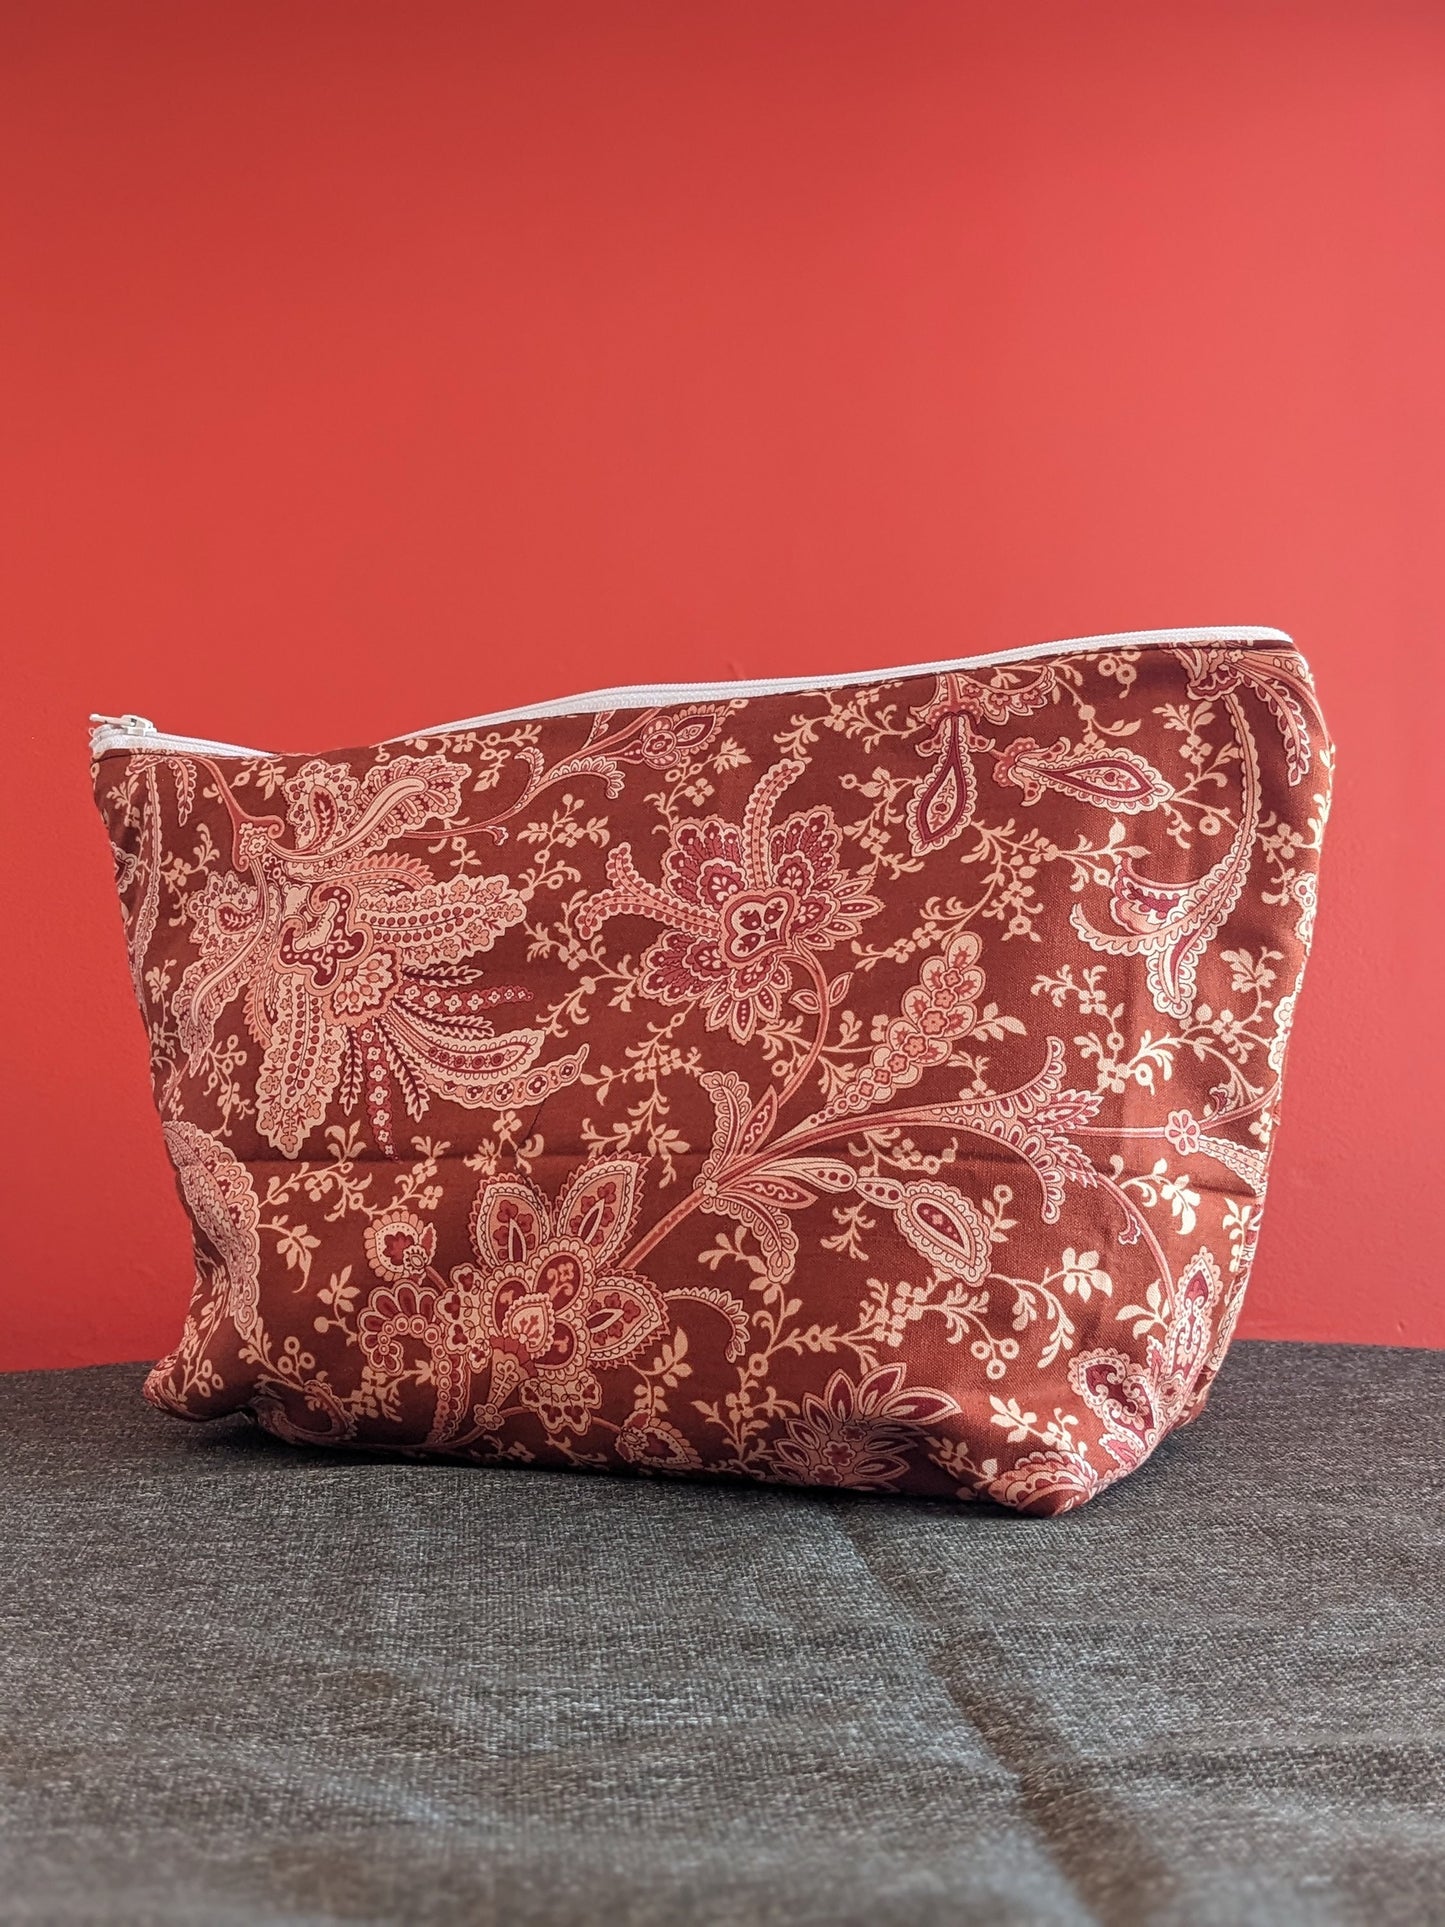 A Frame Quilted Zipper Pouch